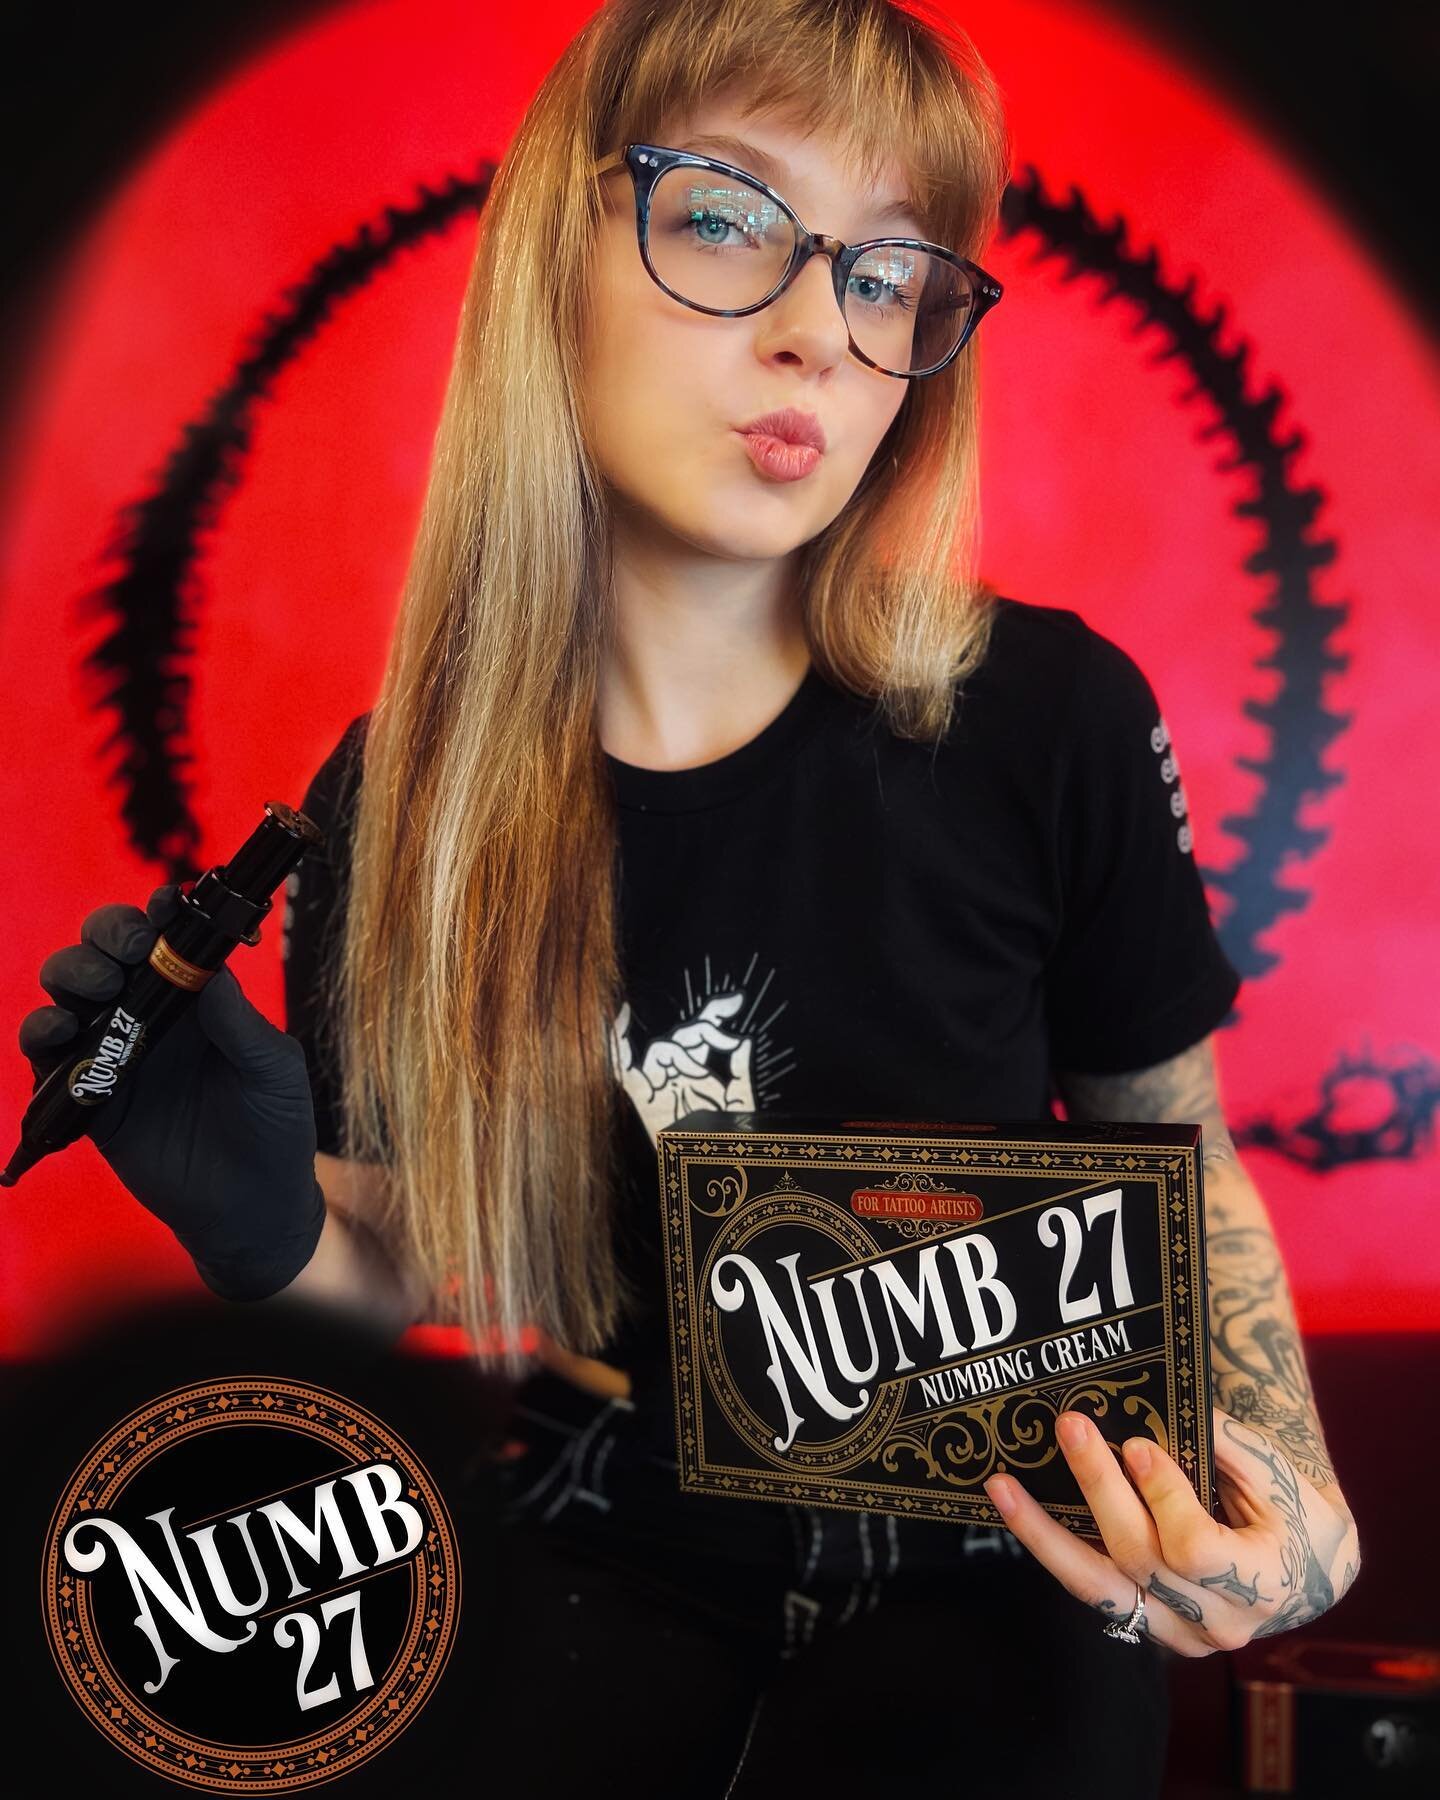 Made by tattooers for tattooers, Numb27. This cream had been carefully designed and formulated to make the tattooing experience perfect!!!
It causes no redness or irritation to the skin for tattooing, it doesn&rsquo;t affect the skins elasticity or m